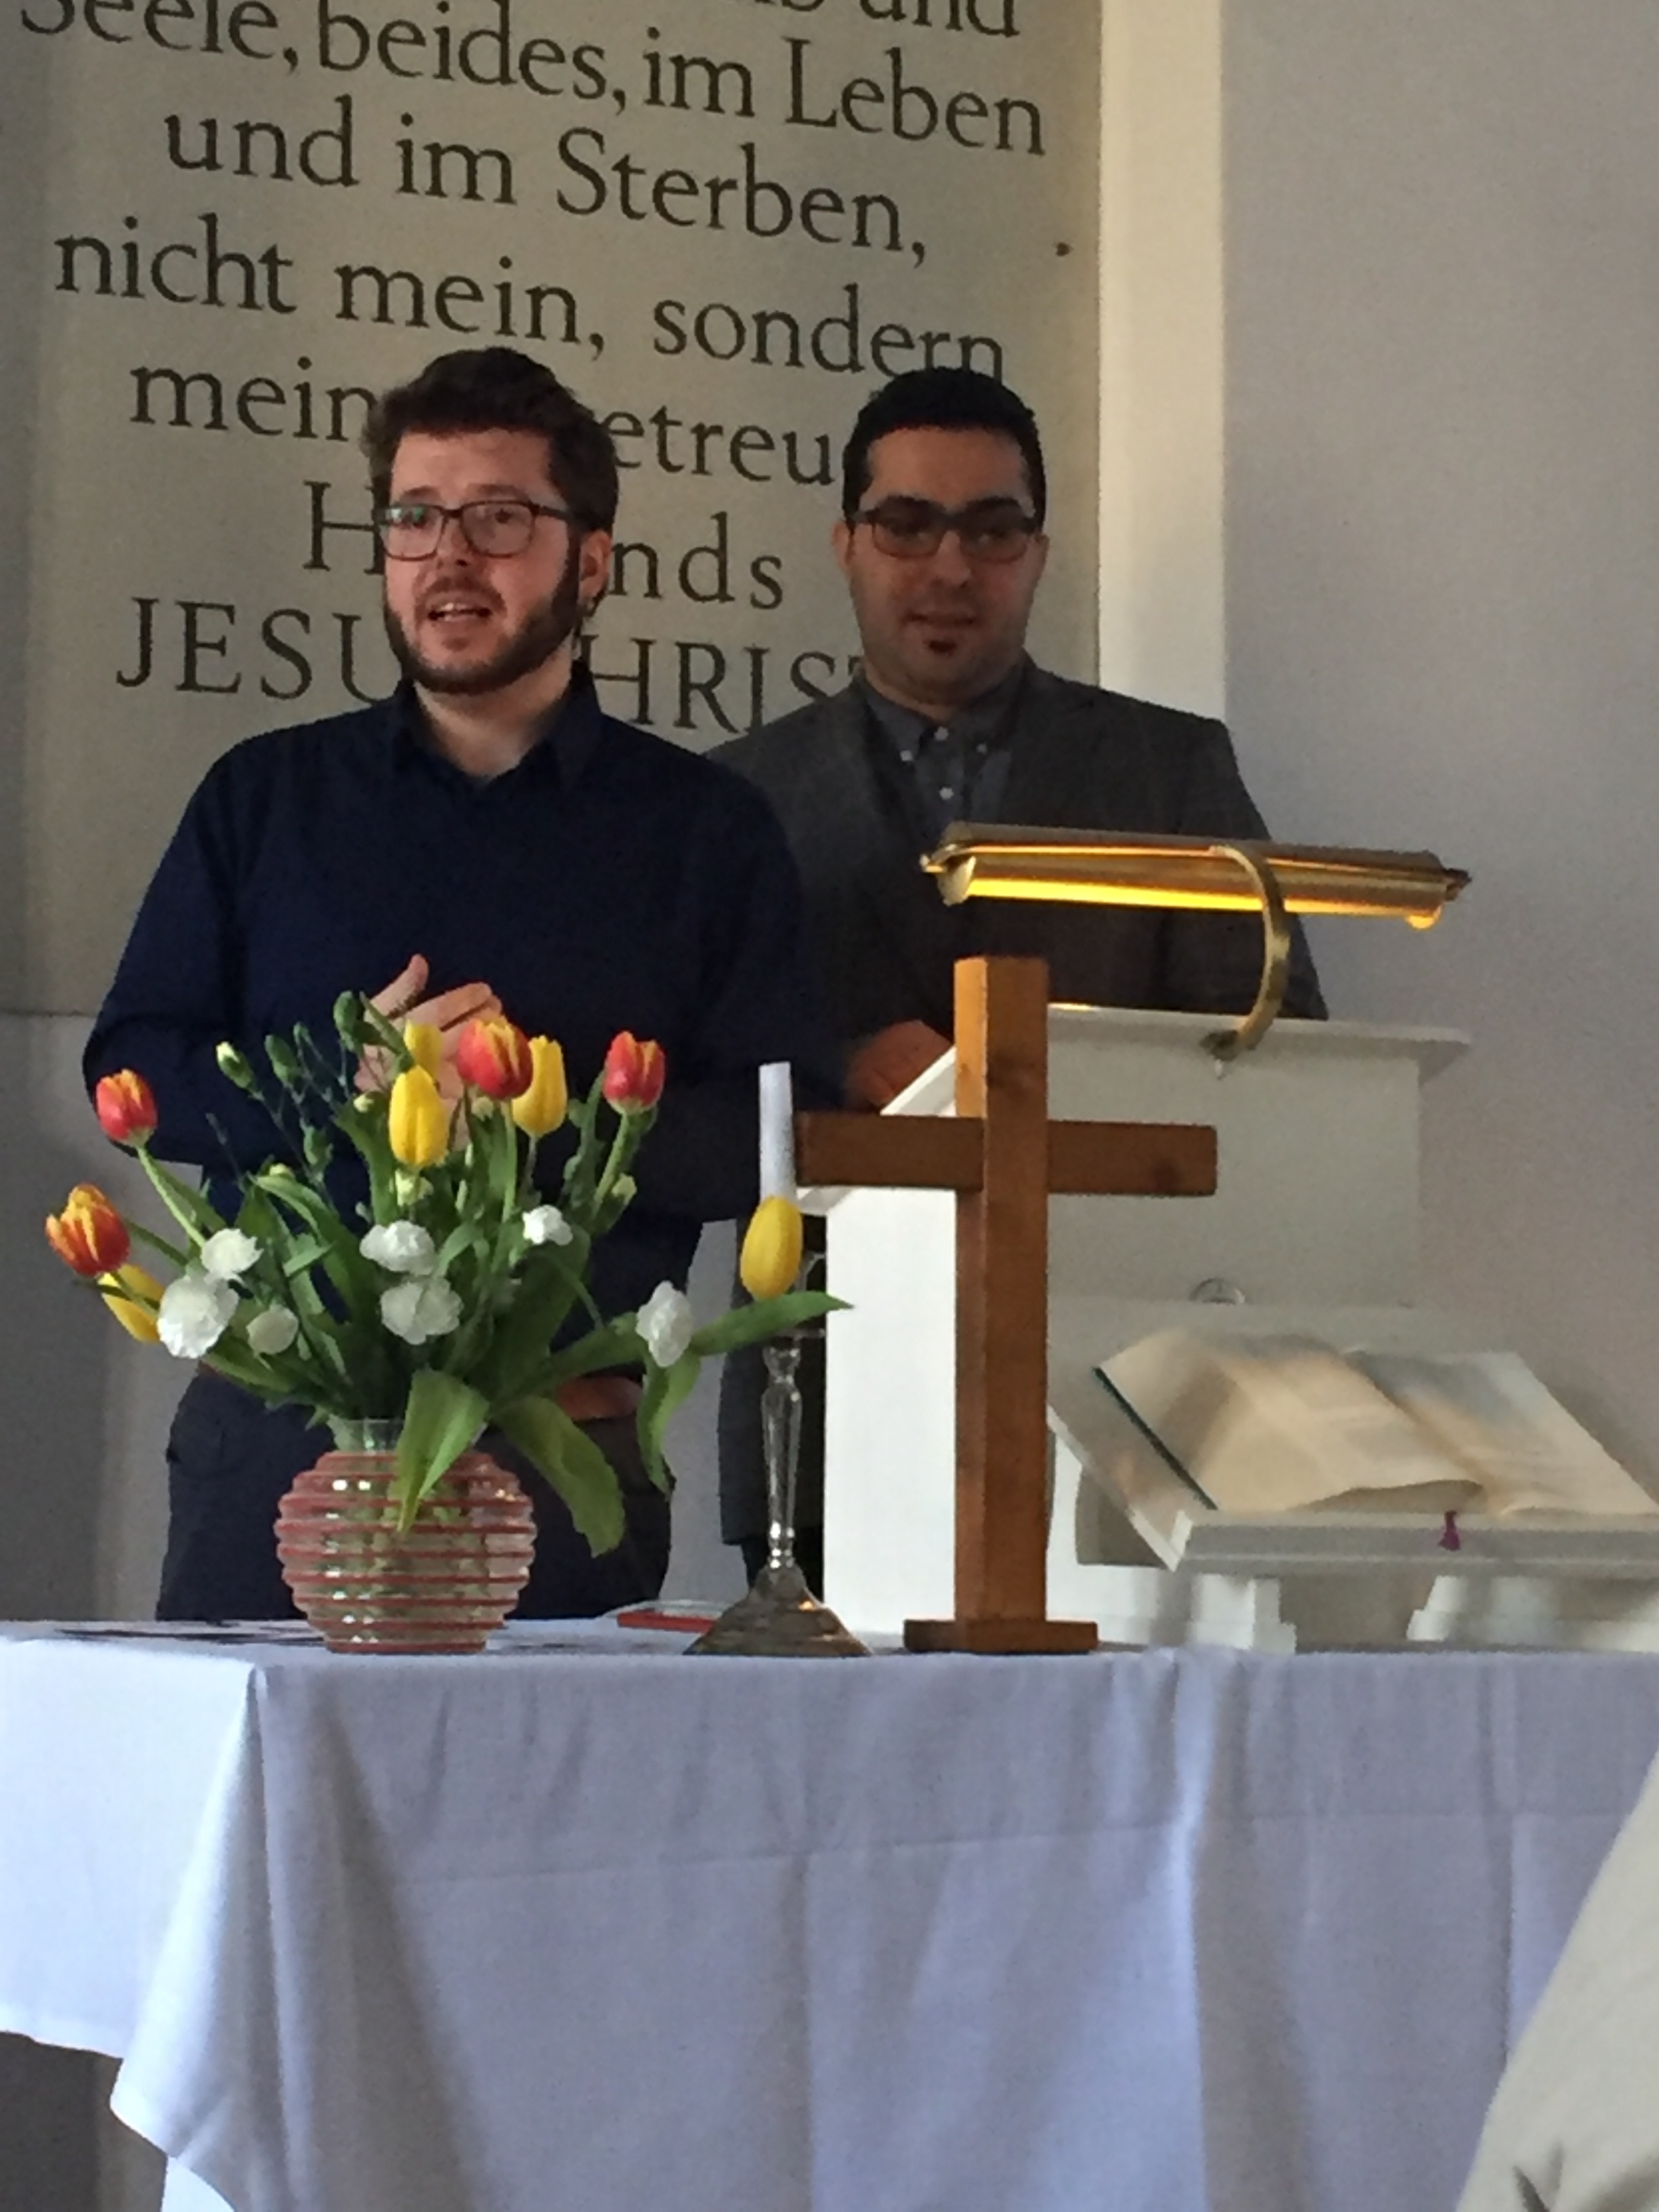 German church intern and Javeed leading cultural exchange events.